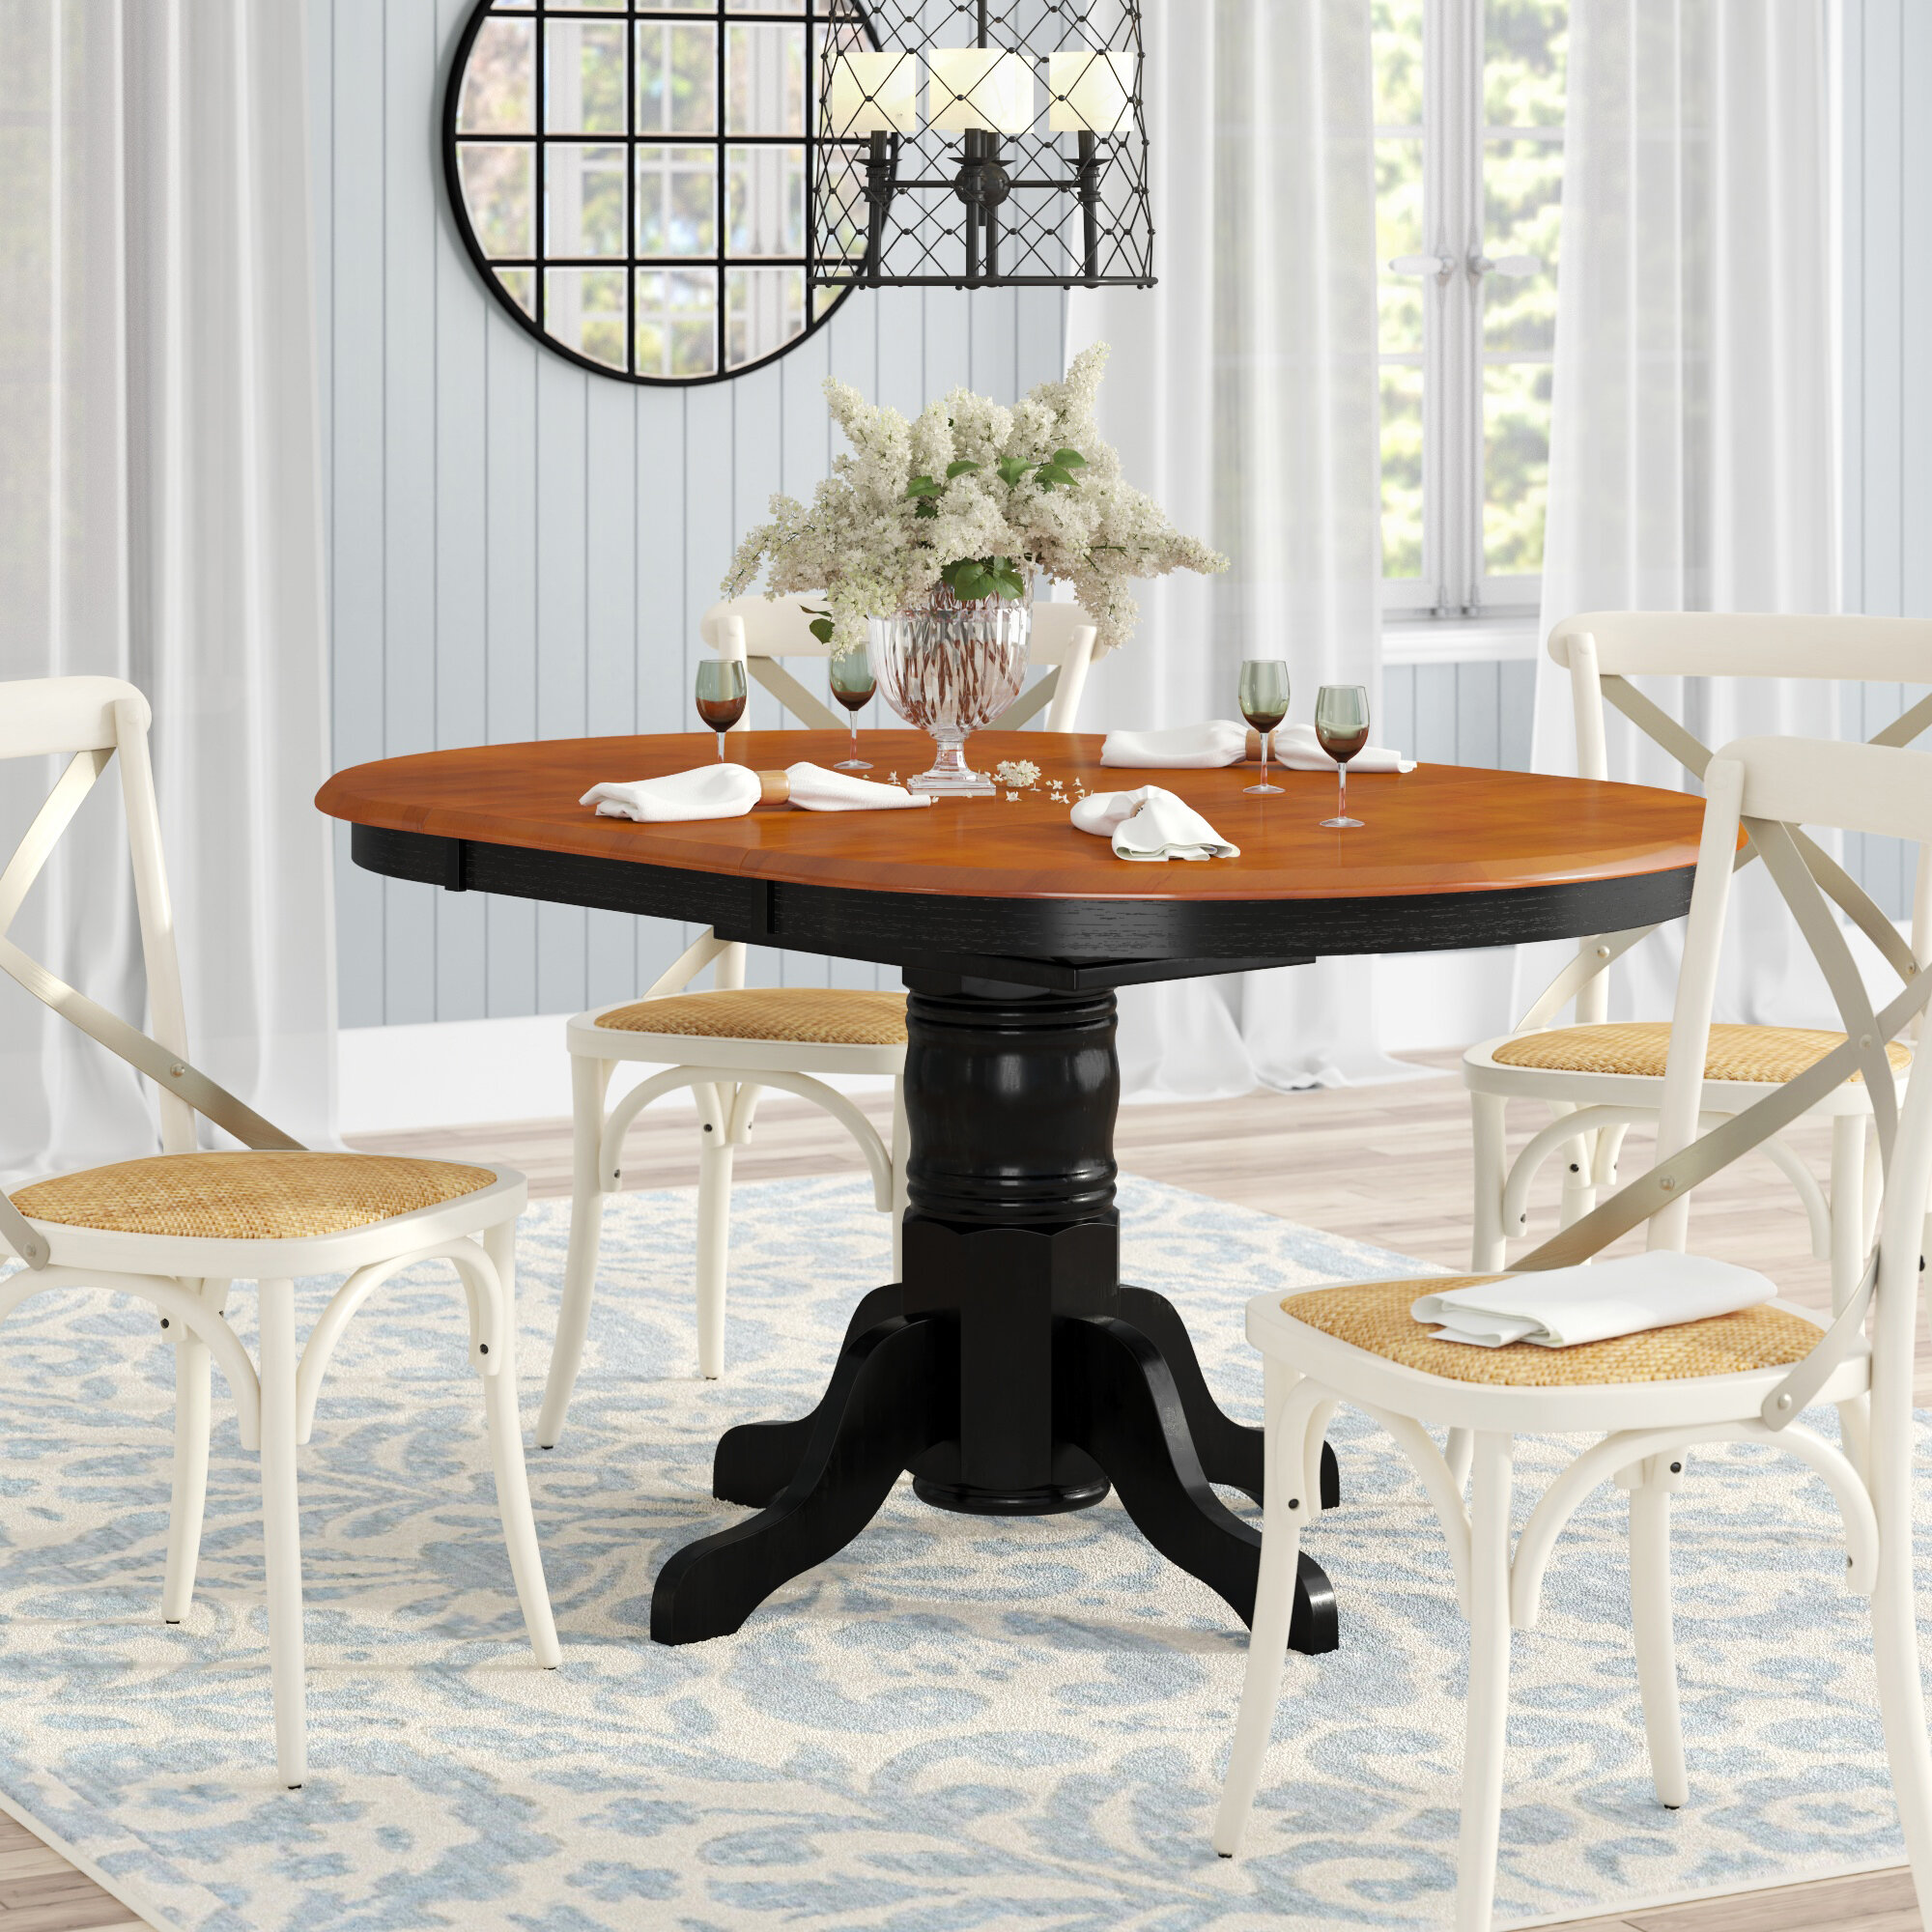 August Grove Aimee Butterfly Leaf Rubberwood Solid Wood Dining Table Reviews Wayfair